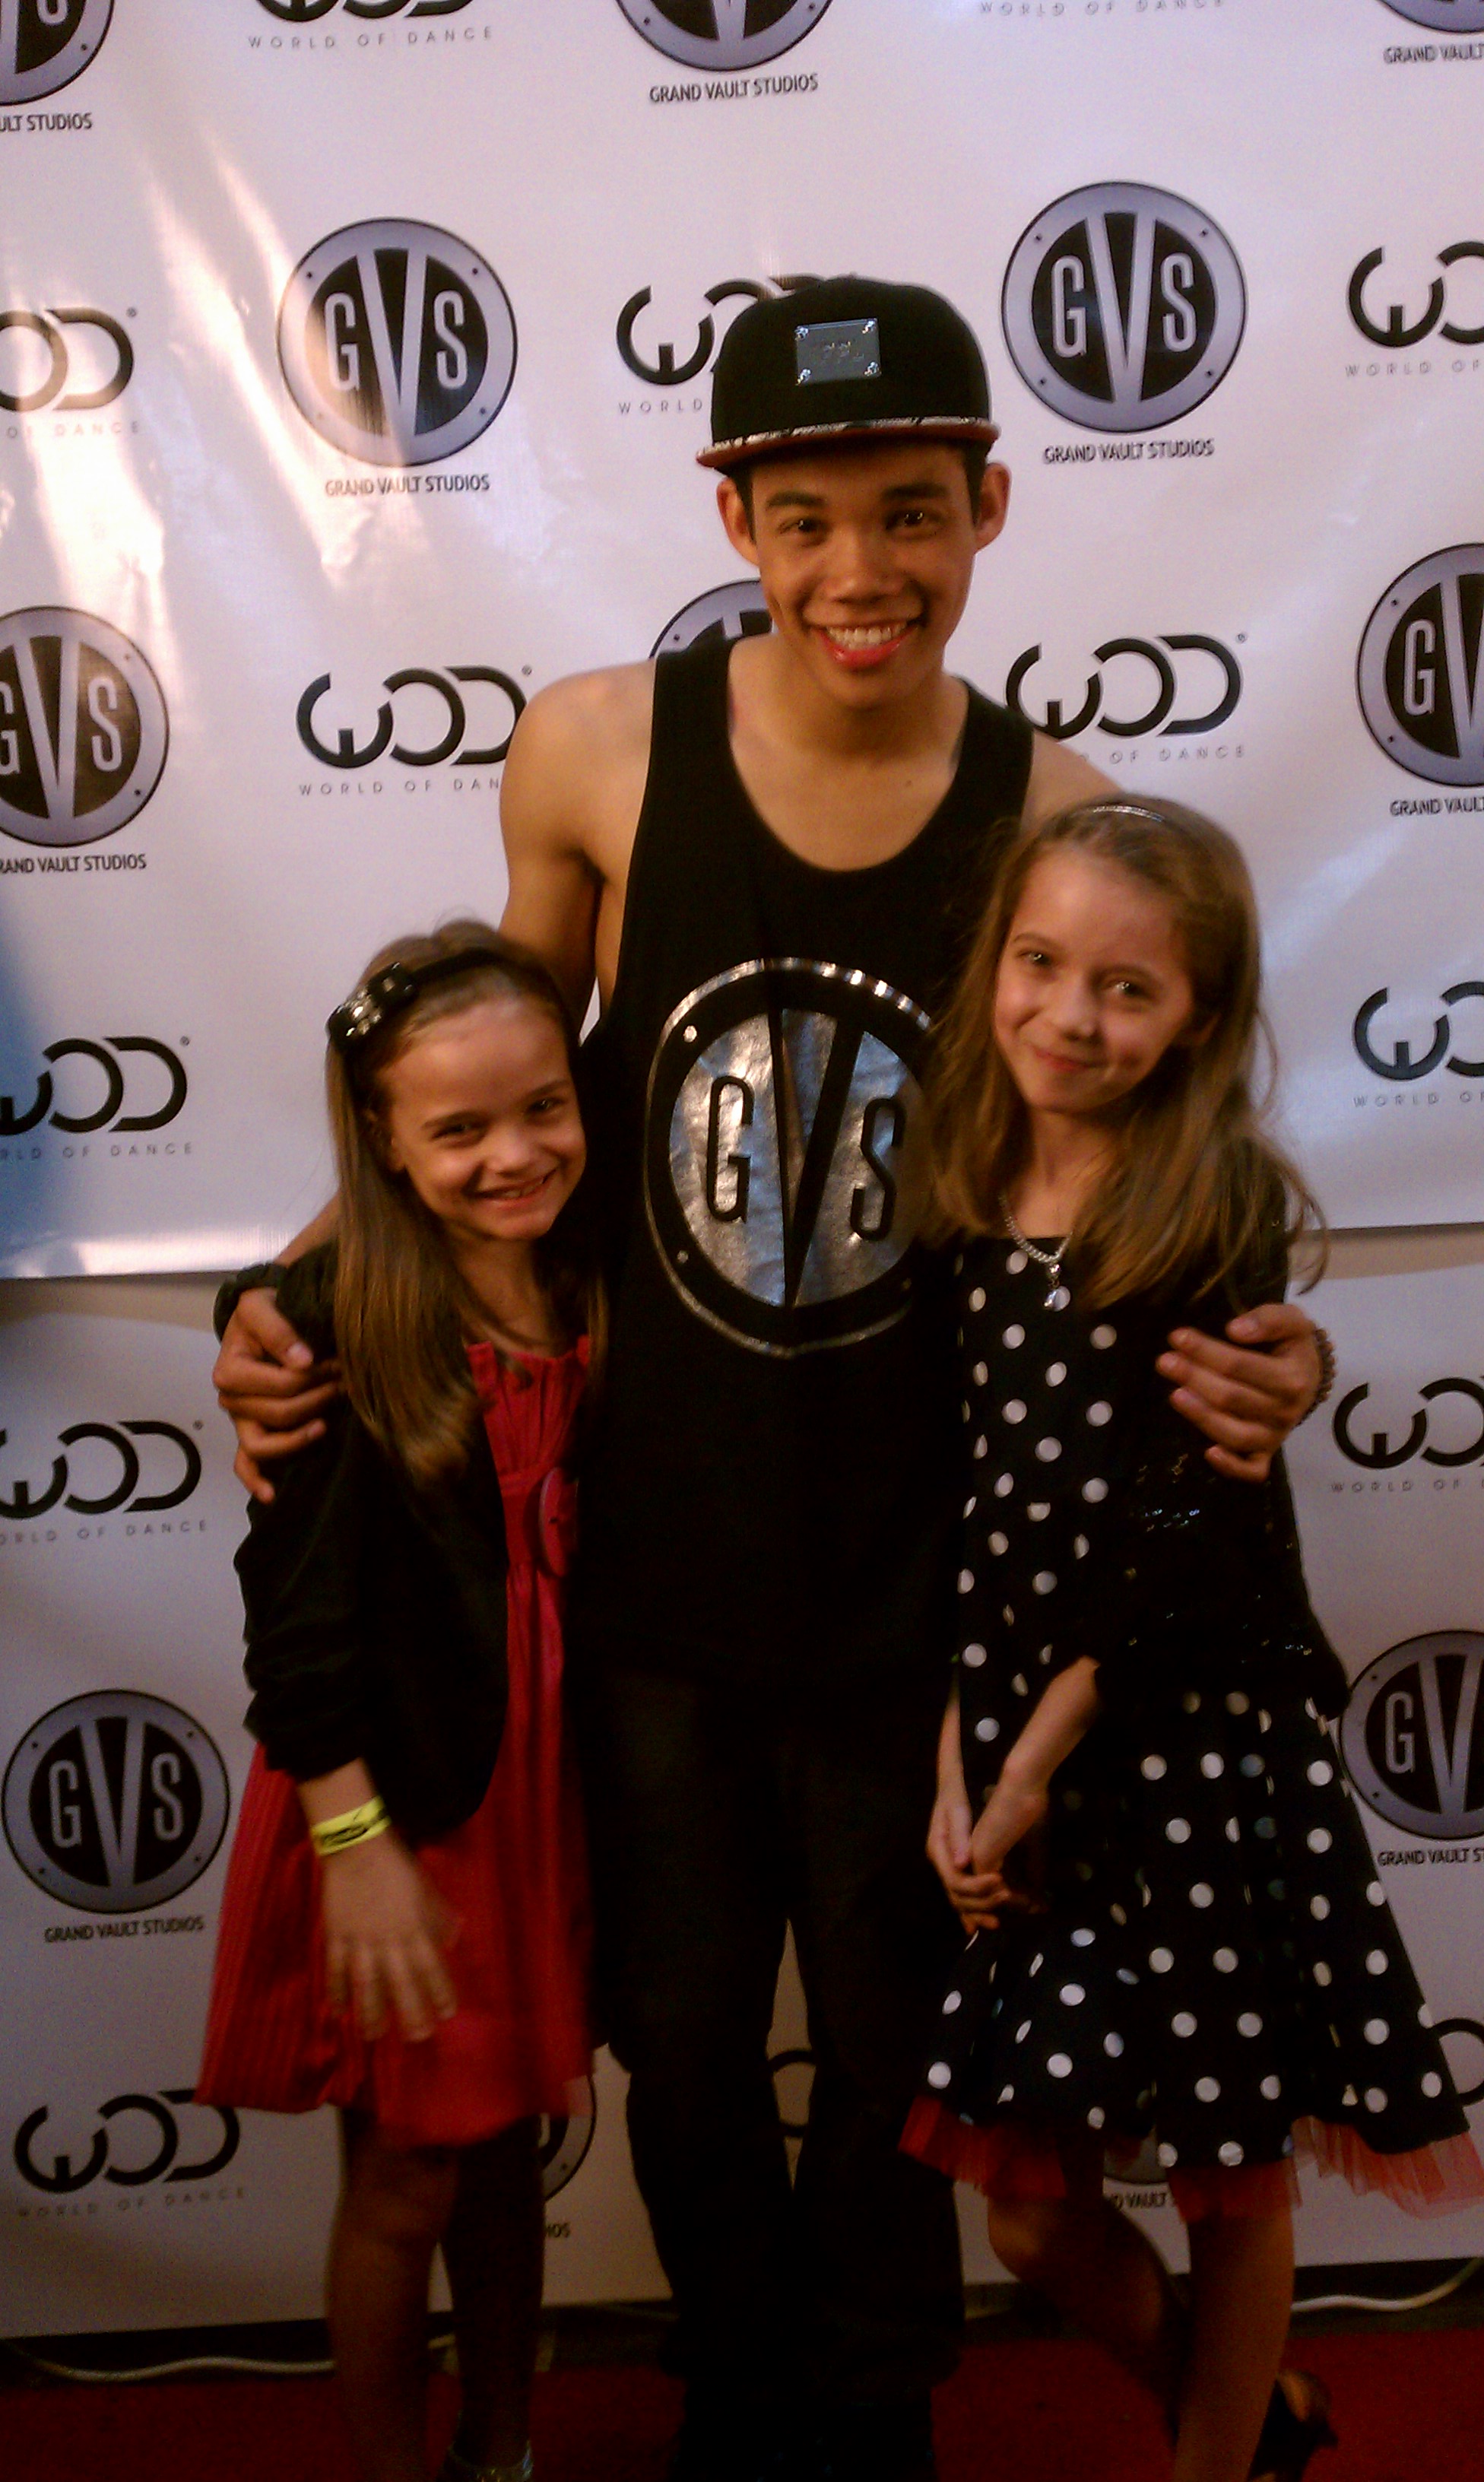 Hannah and sister mykayla with Roshon Fegan at the launch of his dance studio.